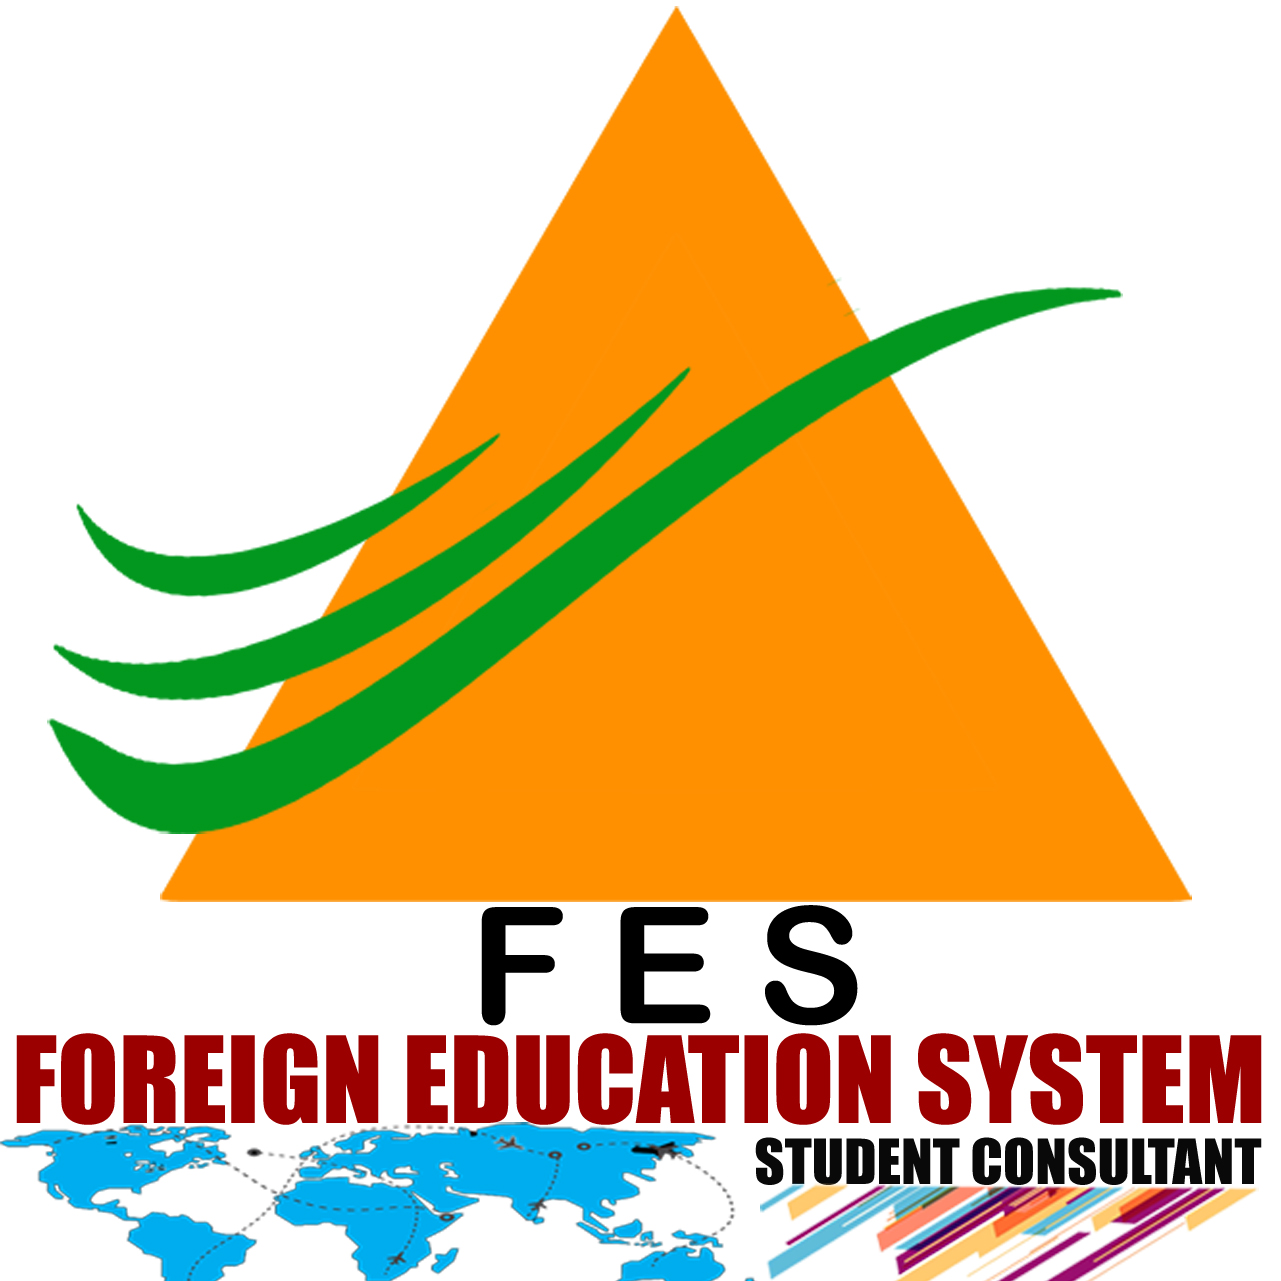 FOREIGN EDUCATION SYSTEM